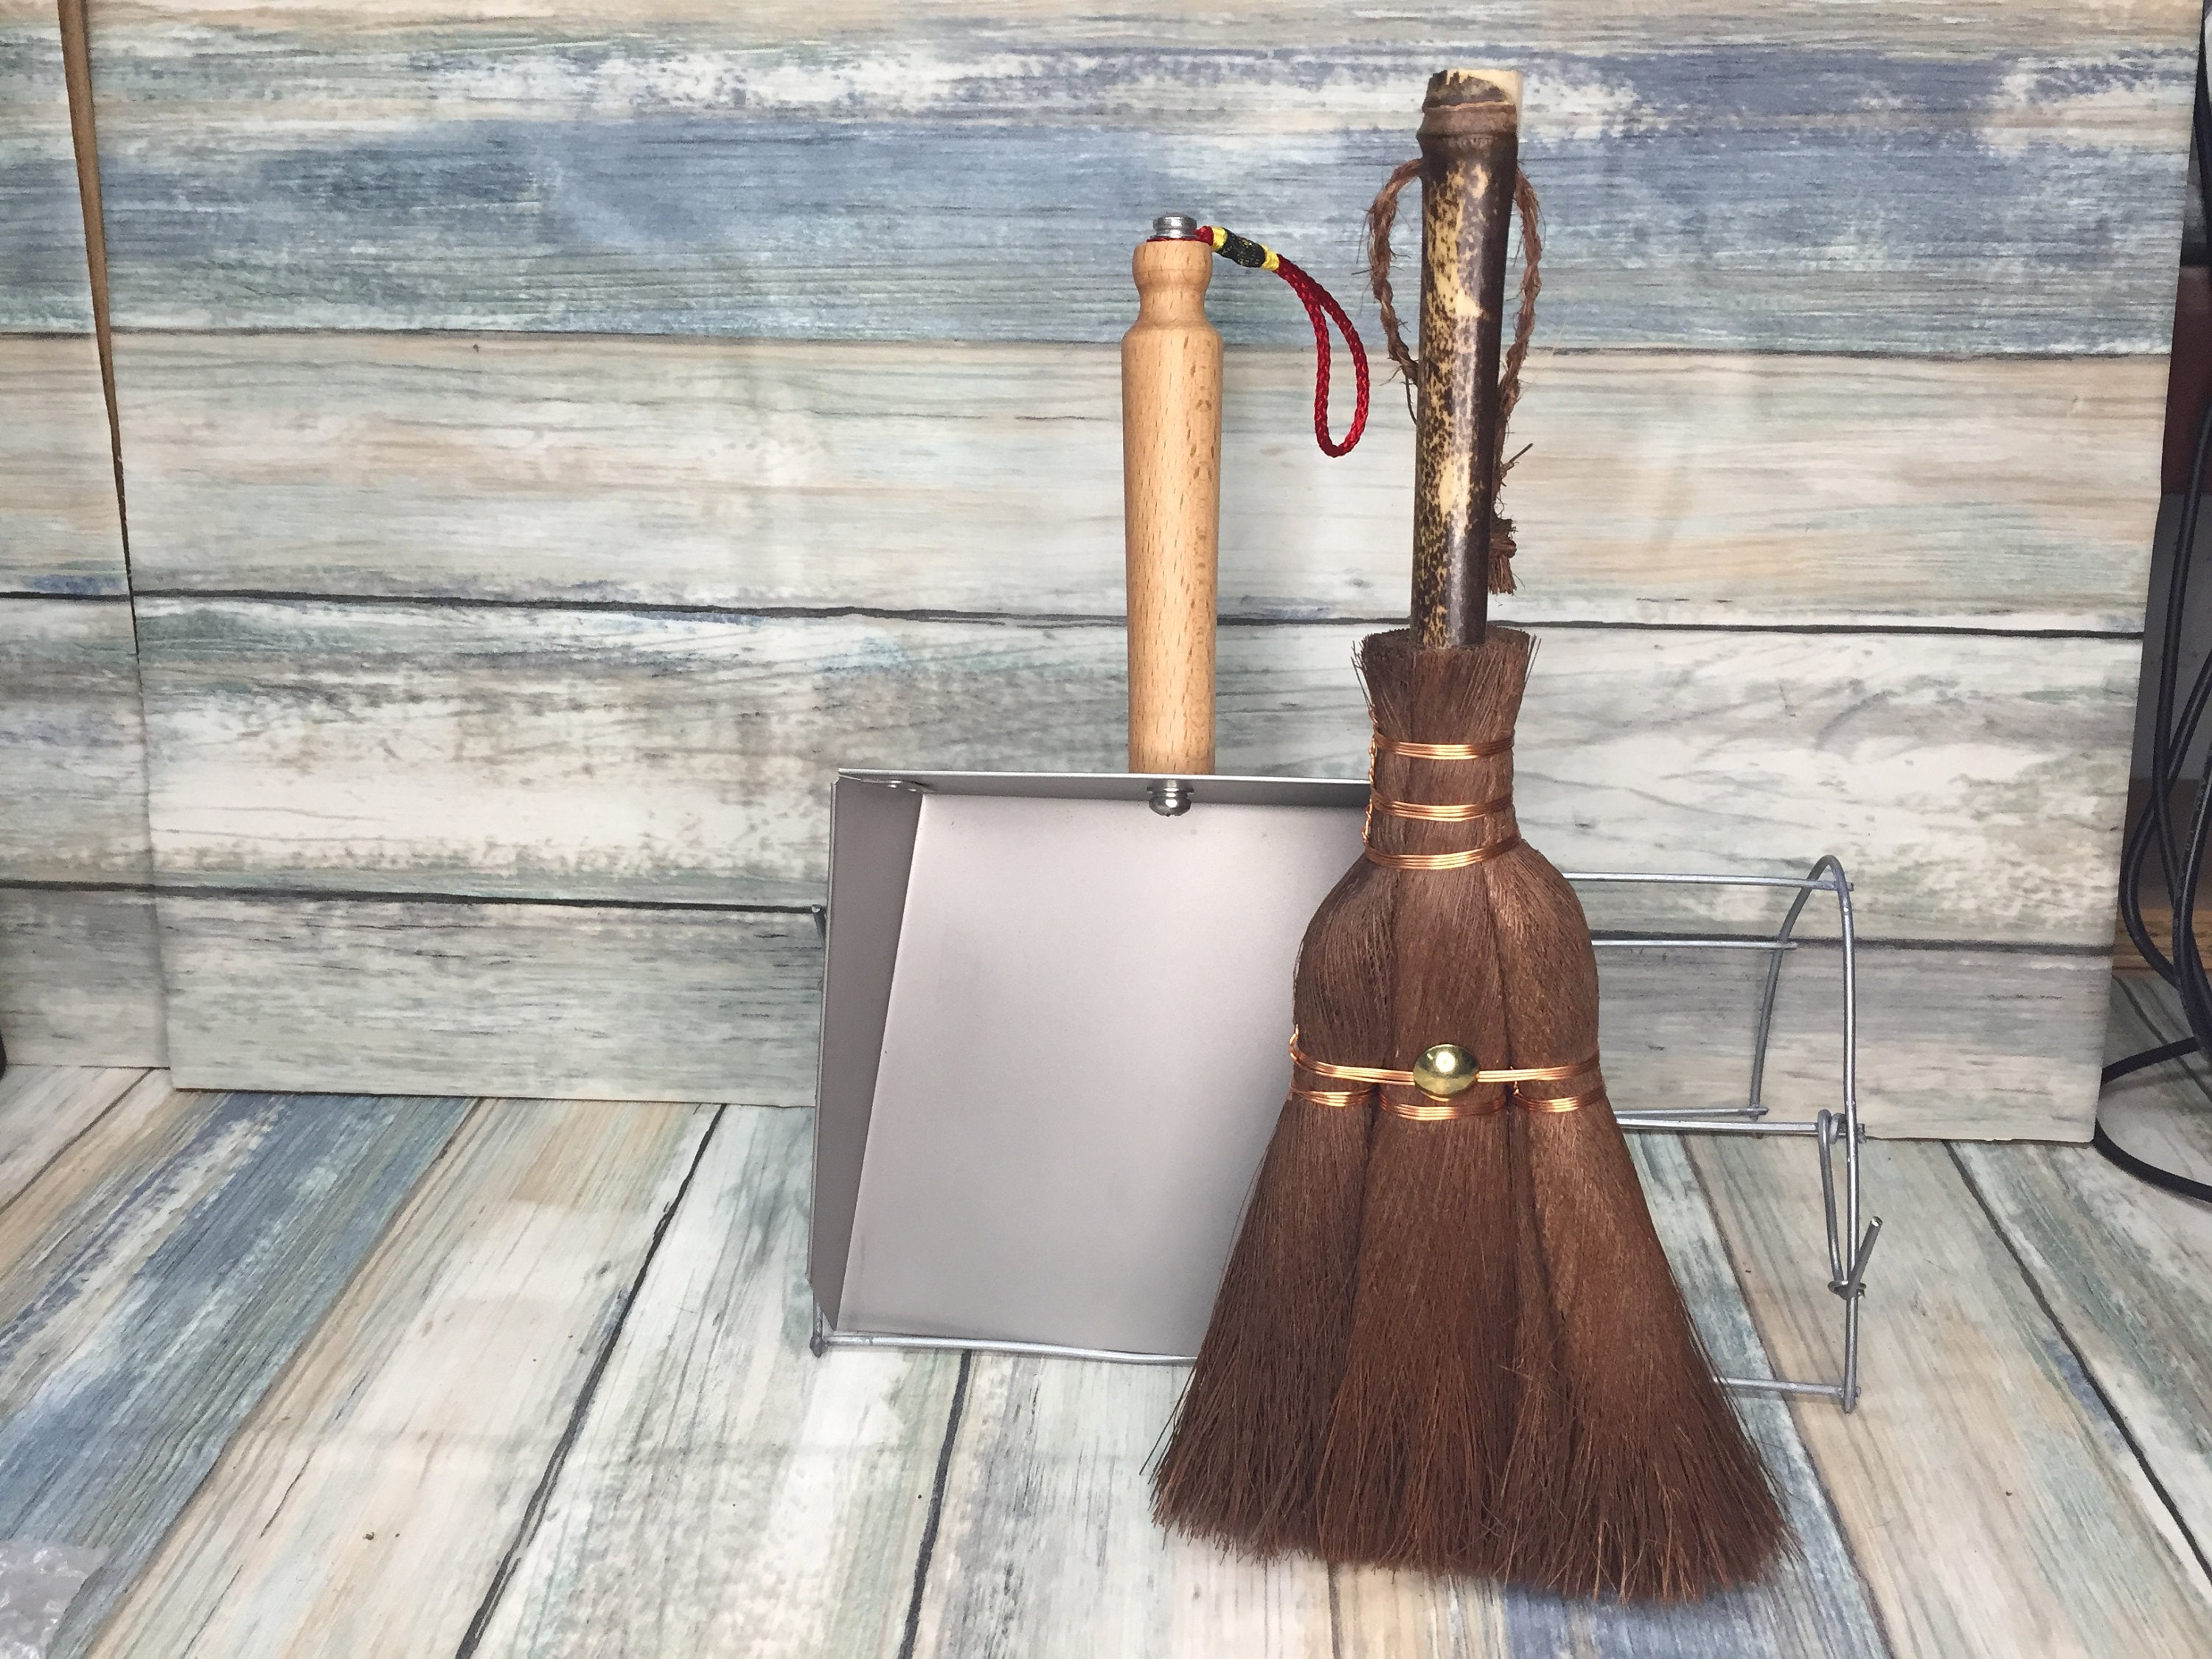 USA Made Fireplace Stove Whisk Broom & Shovel BUCKET With Lid Dustpan Set  Brush Cleaning Coal Ash Pan Coco Fiber Firepit Dixie Cowboy 